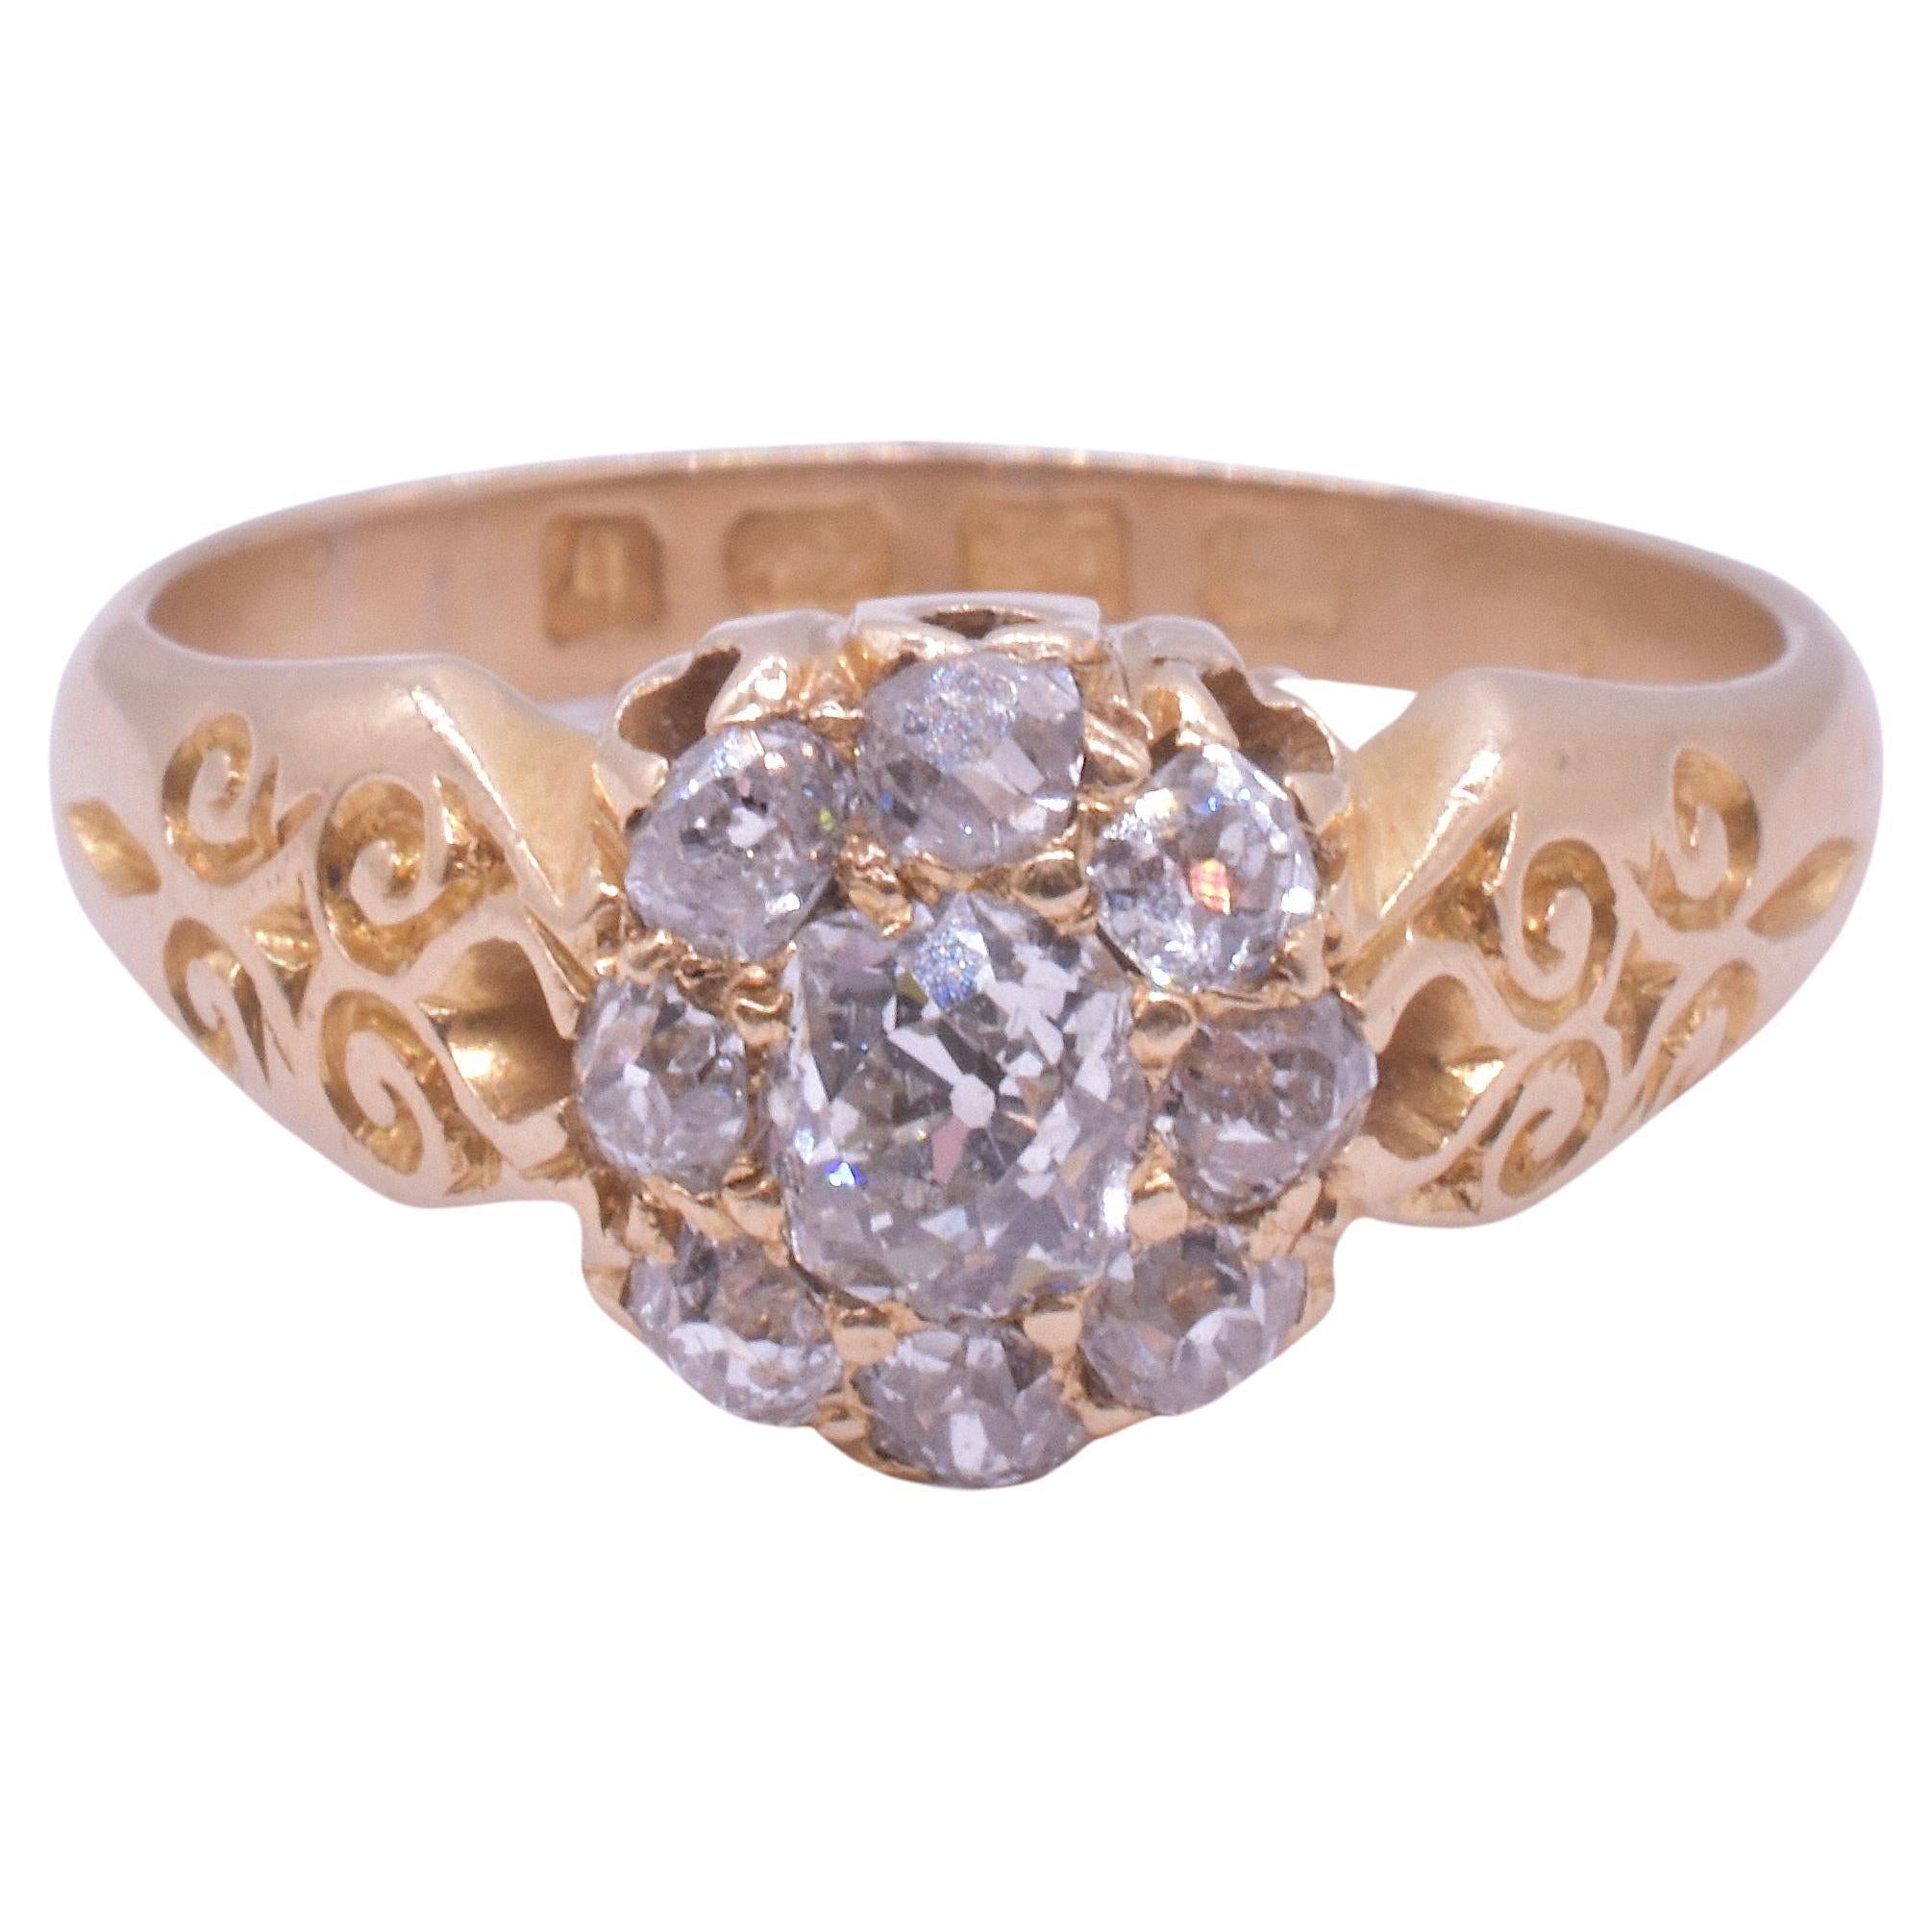 Charming 18K Victorian diamond cluster ring with 9 diamonds, hallmarked for Birmingham in the year 1892 with a large center rose cut diamond surrounded by smaller diamonds and hand set with a decorative band of carved flourishes along the shoulders.